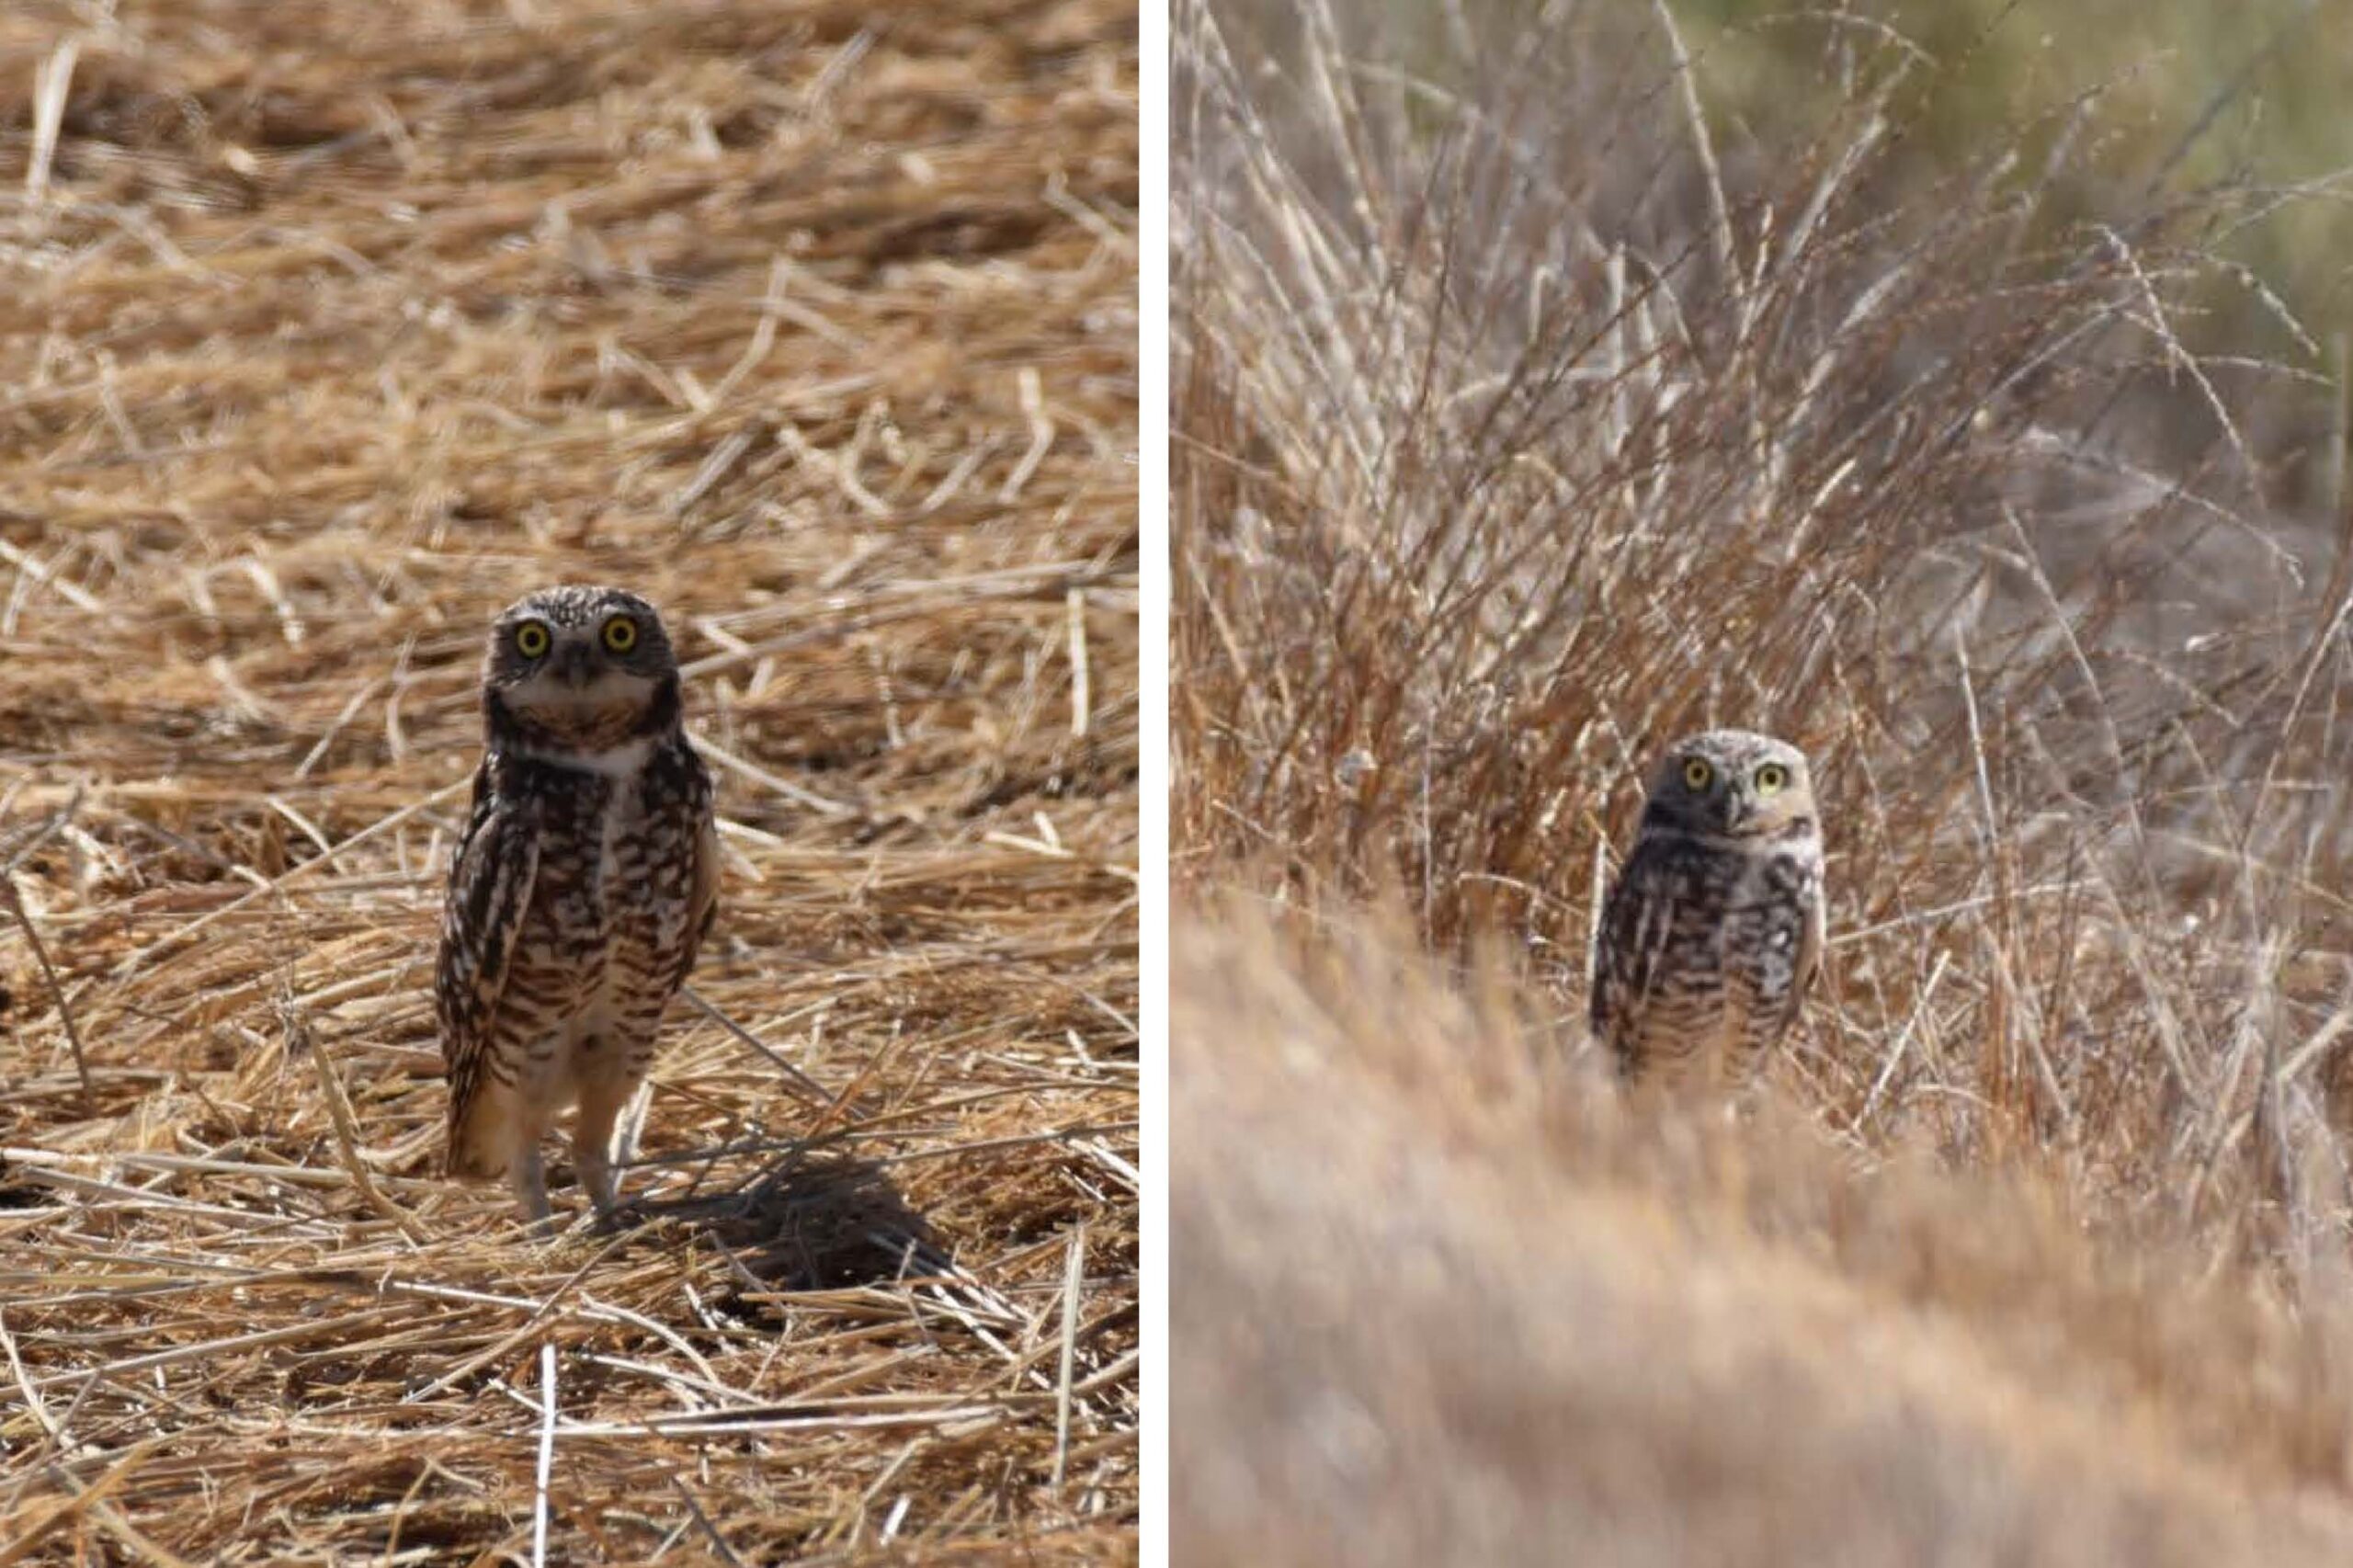 Two photos of a brown and white speckled Burrowing owl staring at the camera lens combined in a photo collage.